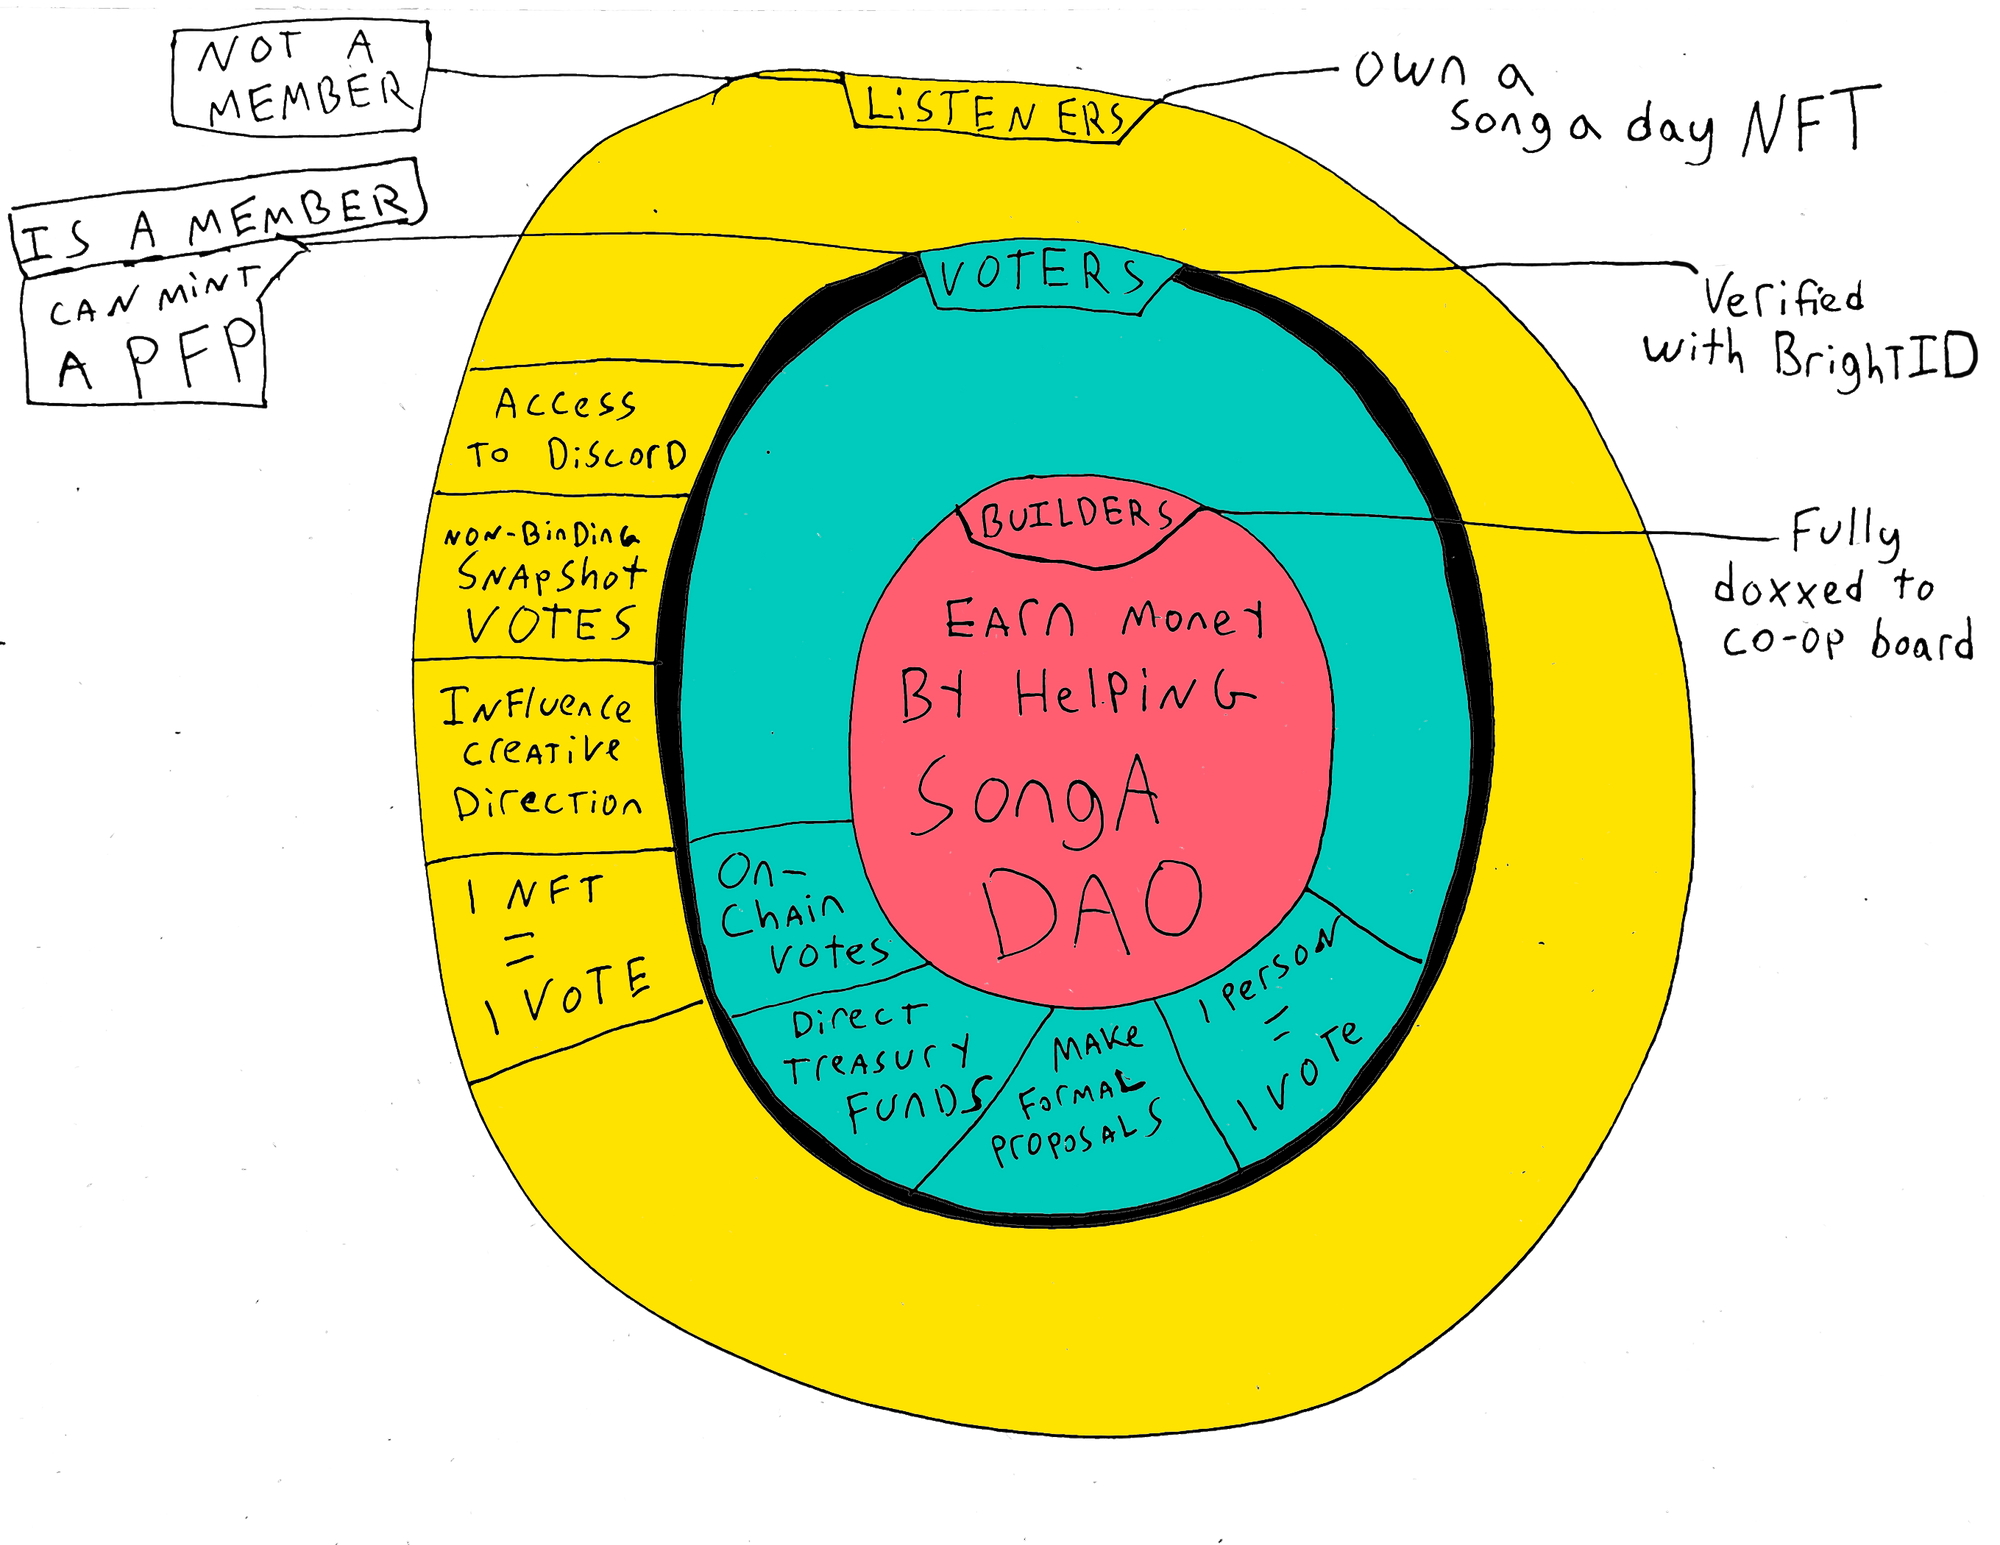 The circles of song a day